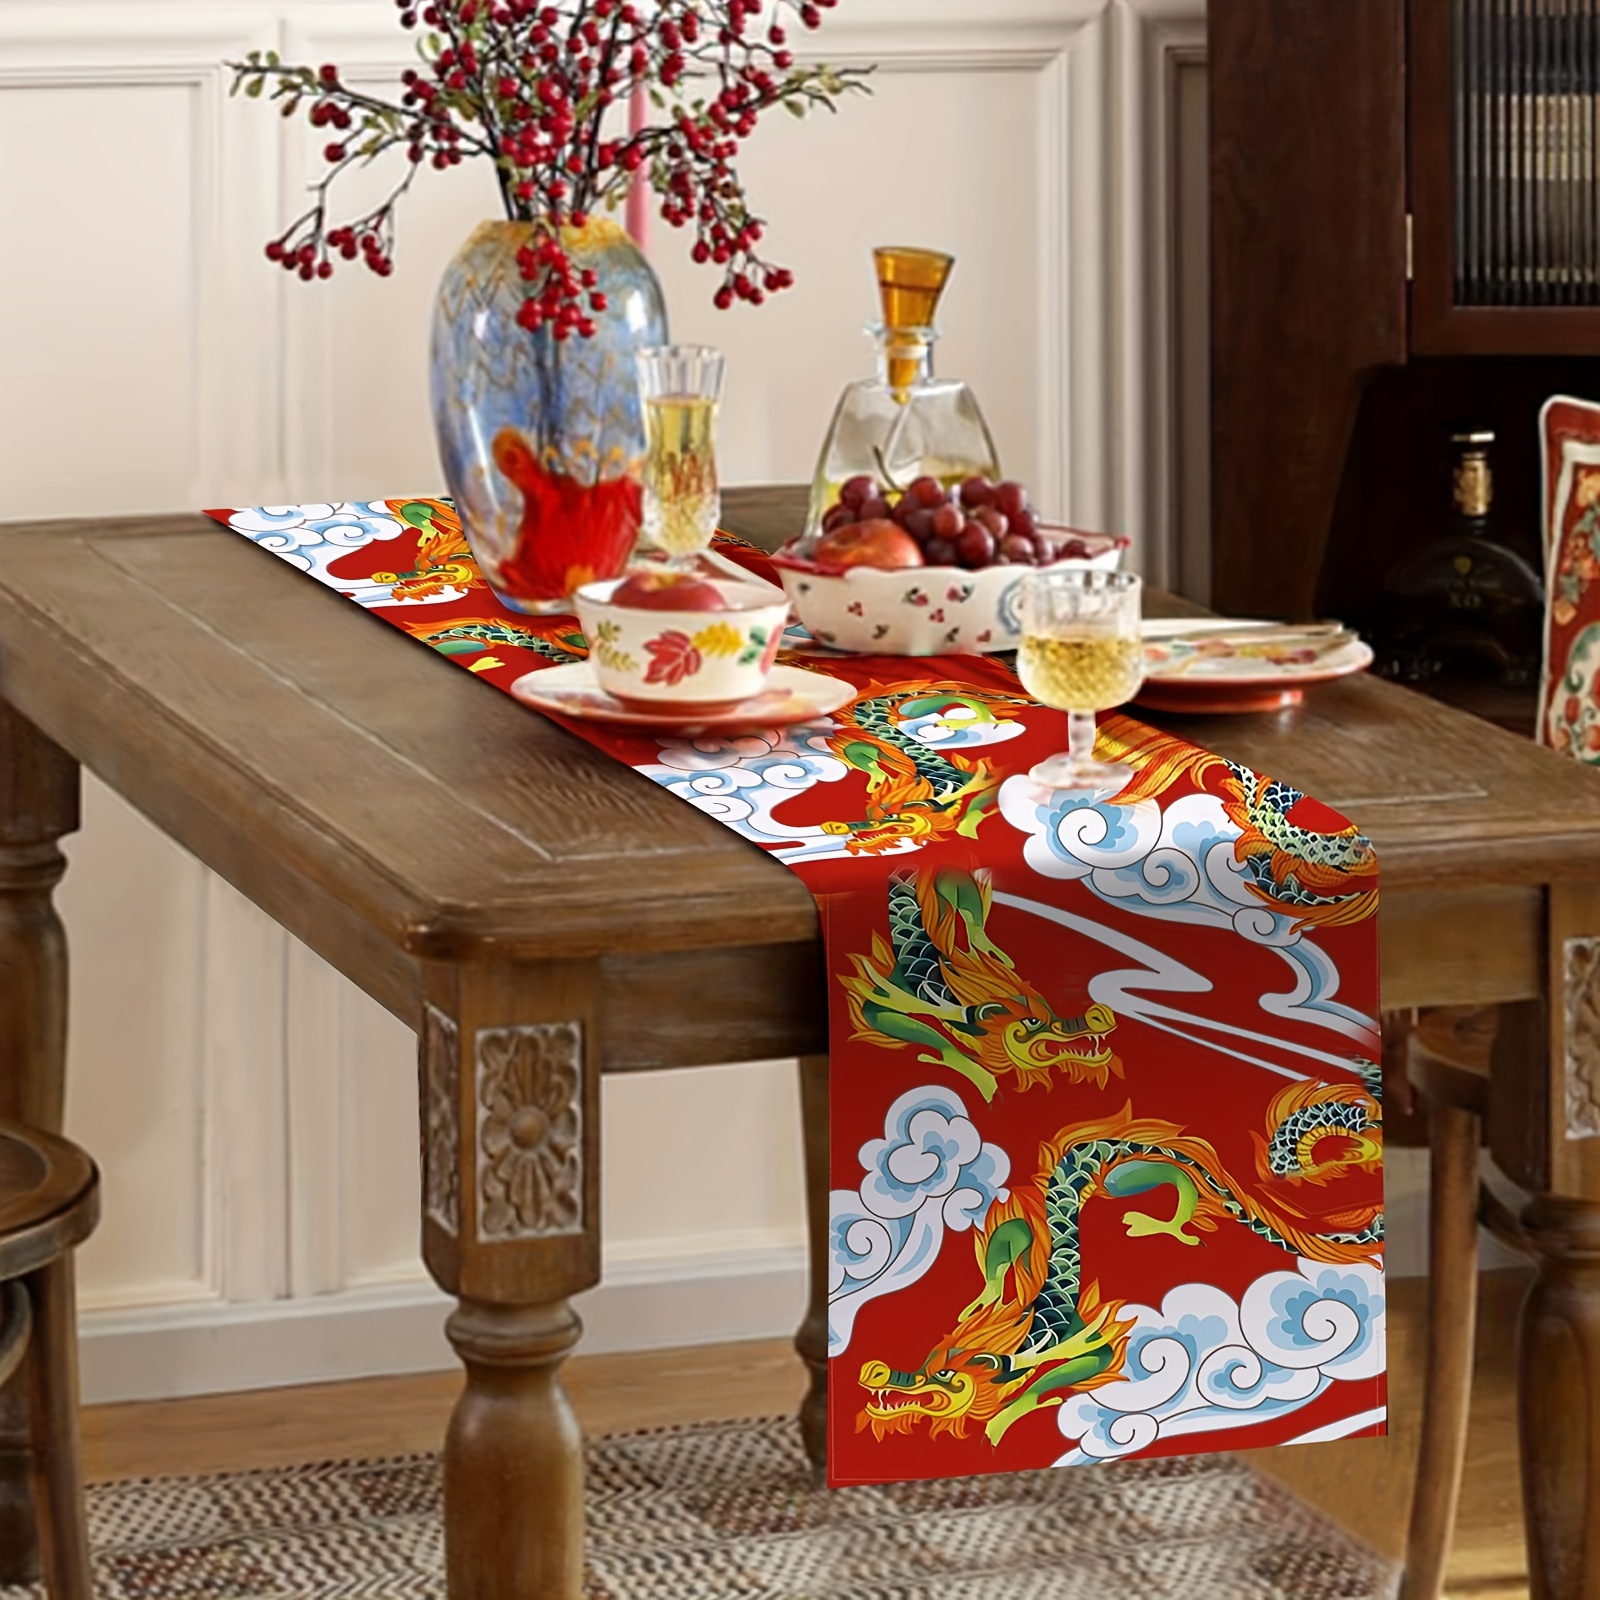 1/4pcs, New Year's Greetings Dragon Printed Table Runner, Dragon Table  Decorations, Asian Table Runner, Party Decorations For Spring Festival  Party Su